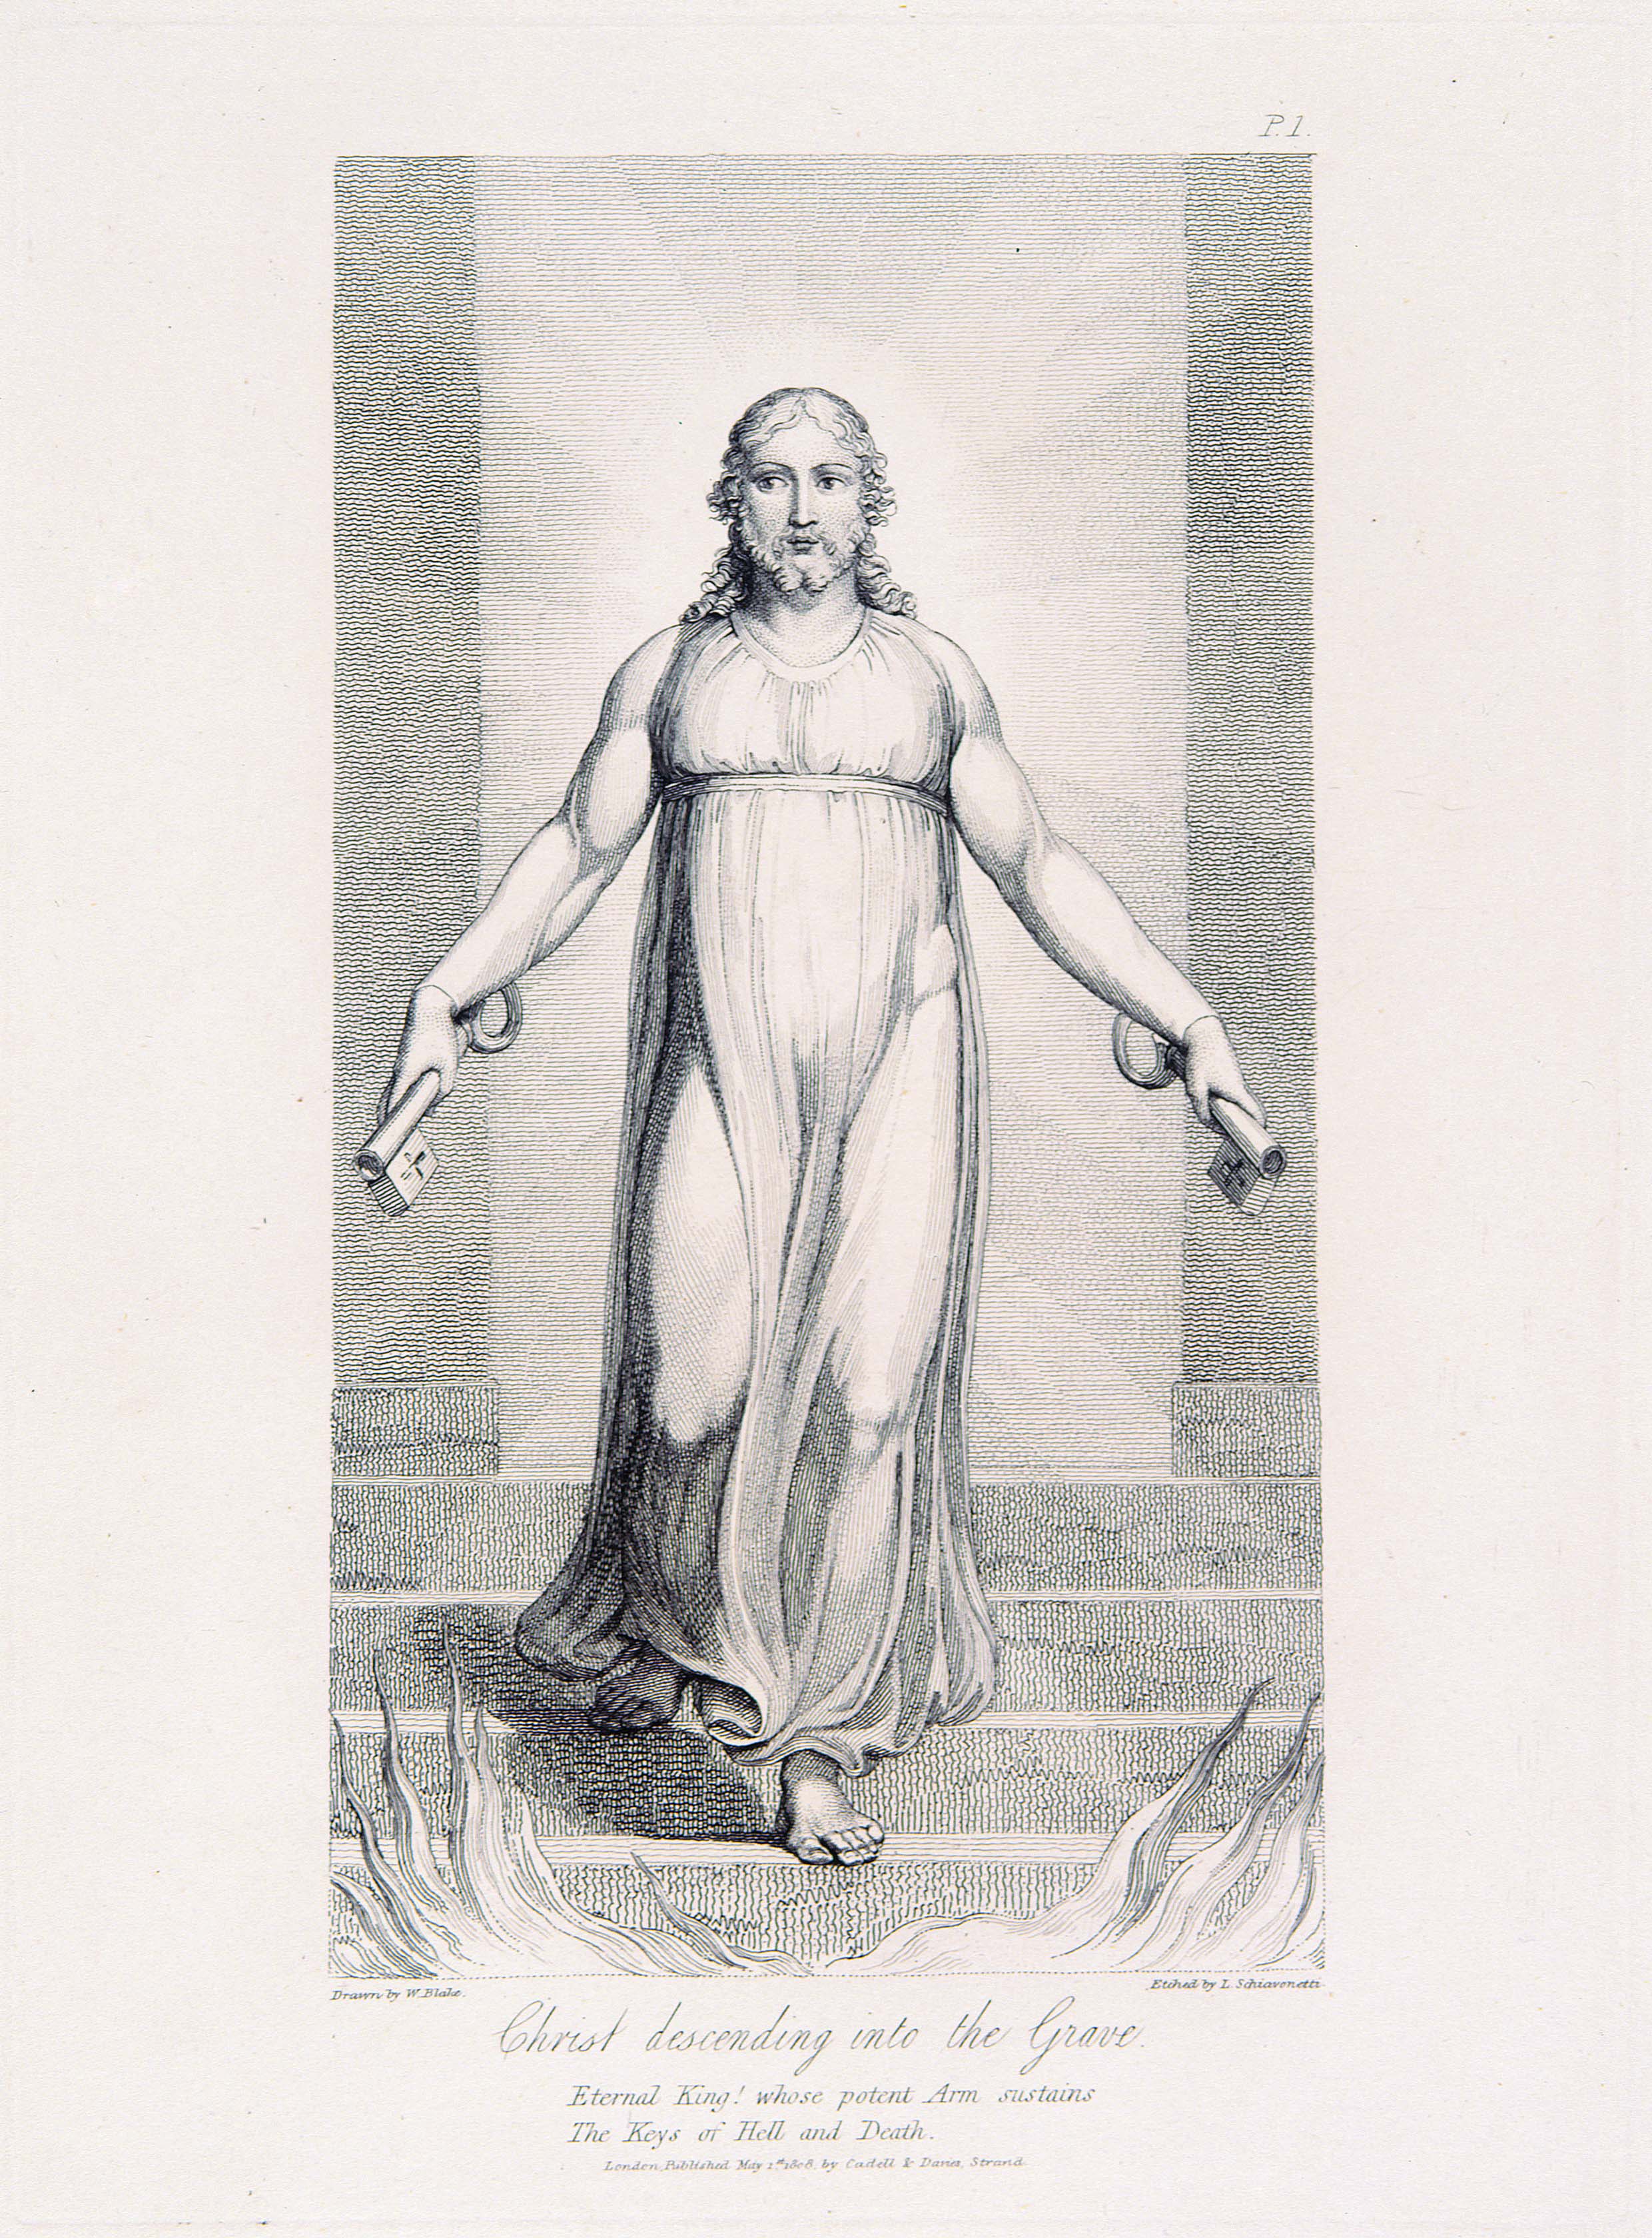 P.1.
	Drawn by W. Blake.
	Etched by L. Schiavonetti.
	Christ descending into the Grave.
	Eternal King! whose potent Arm sustains
	The Keys of Hell and Death.
	London, Published May 1st. 1808, by Cadell & Davies, Strand.